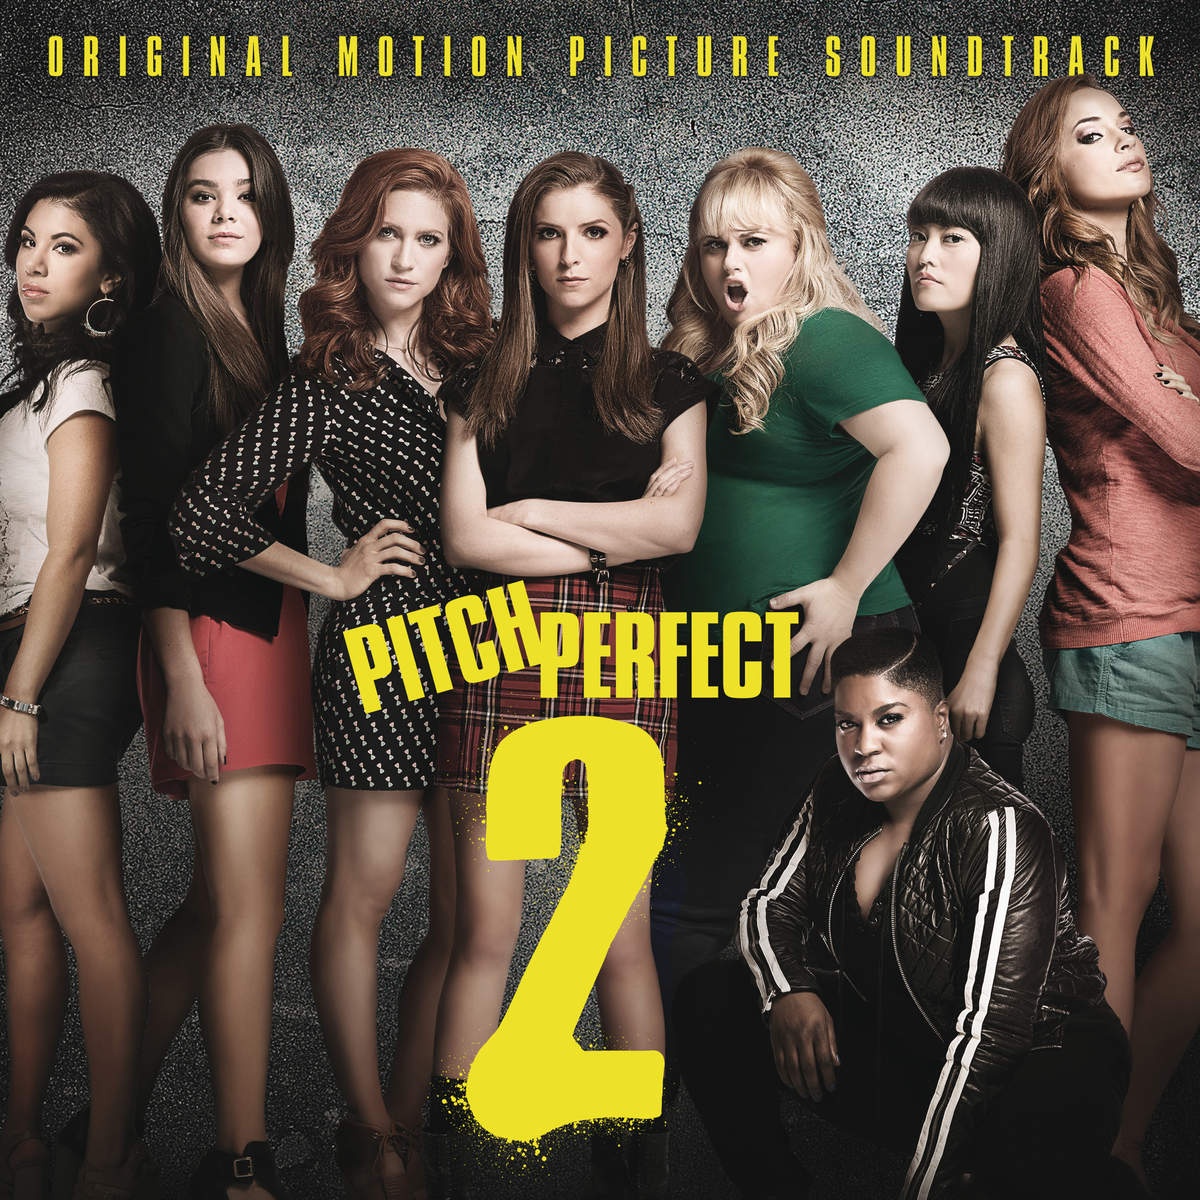 Convention Performance - From "Pitch Perfect 2" Soundtrack